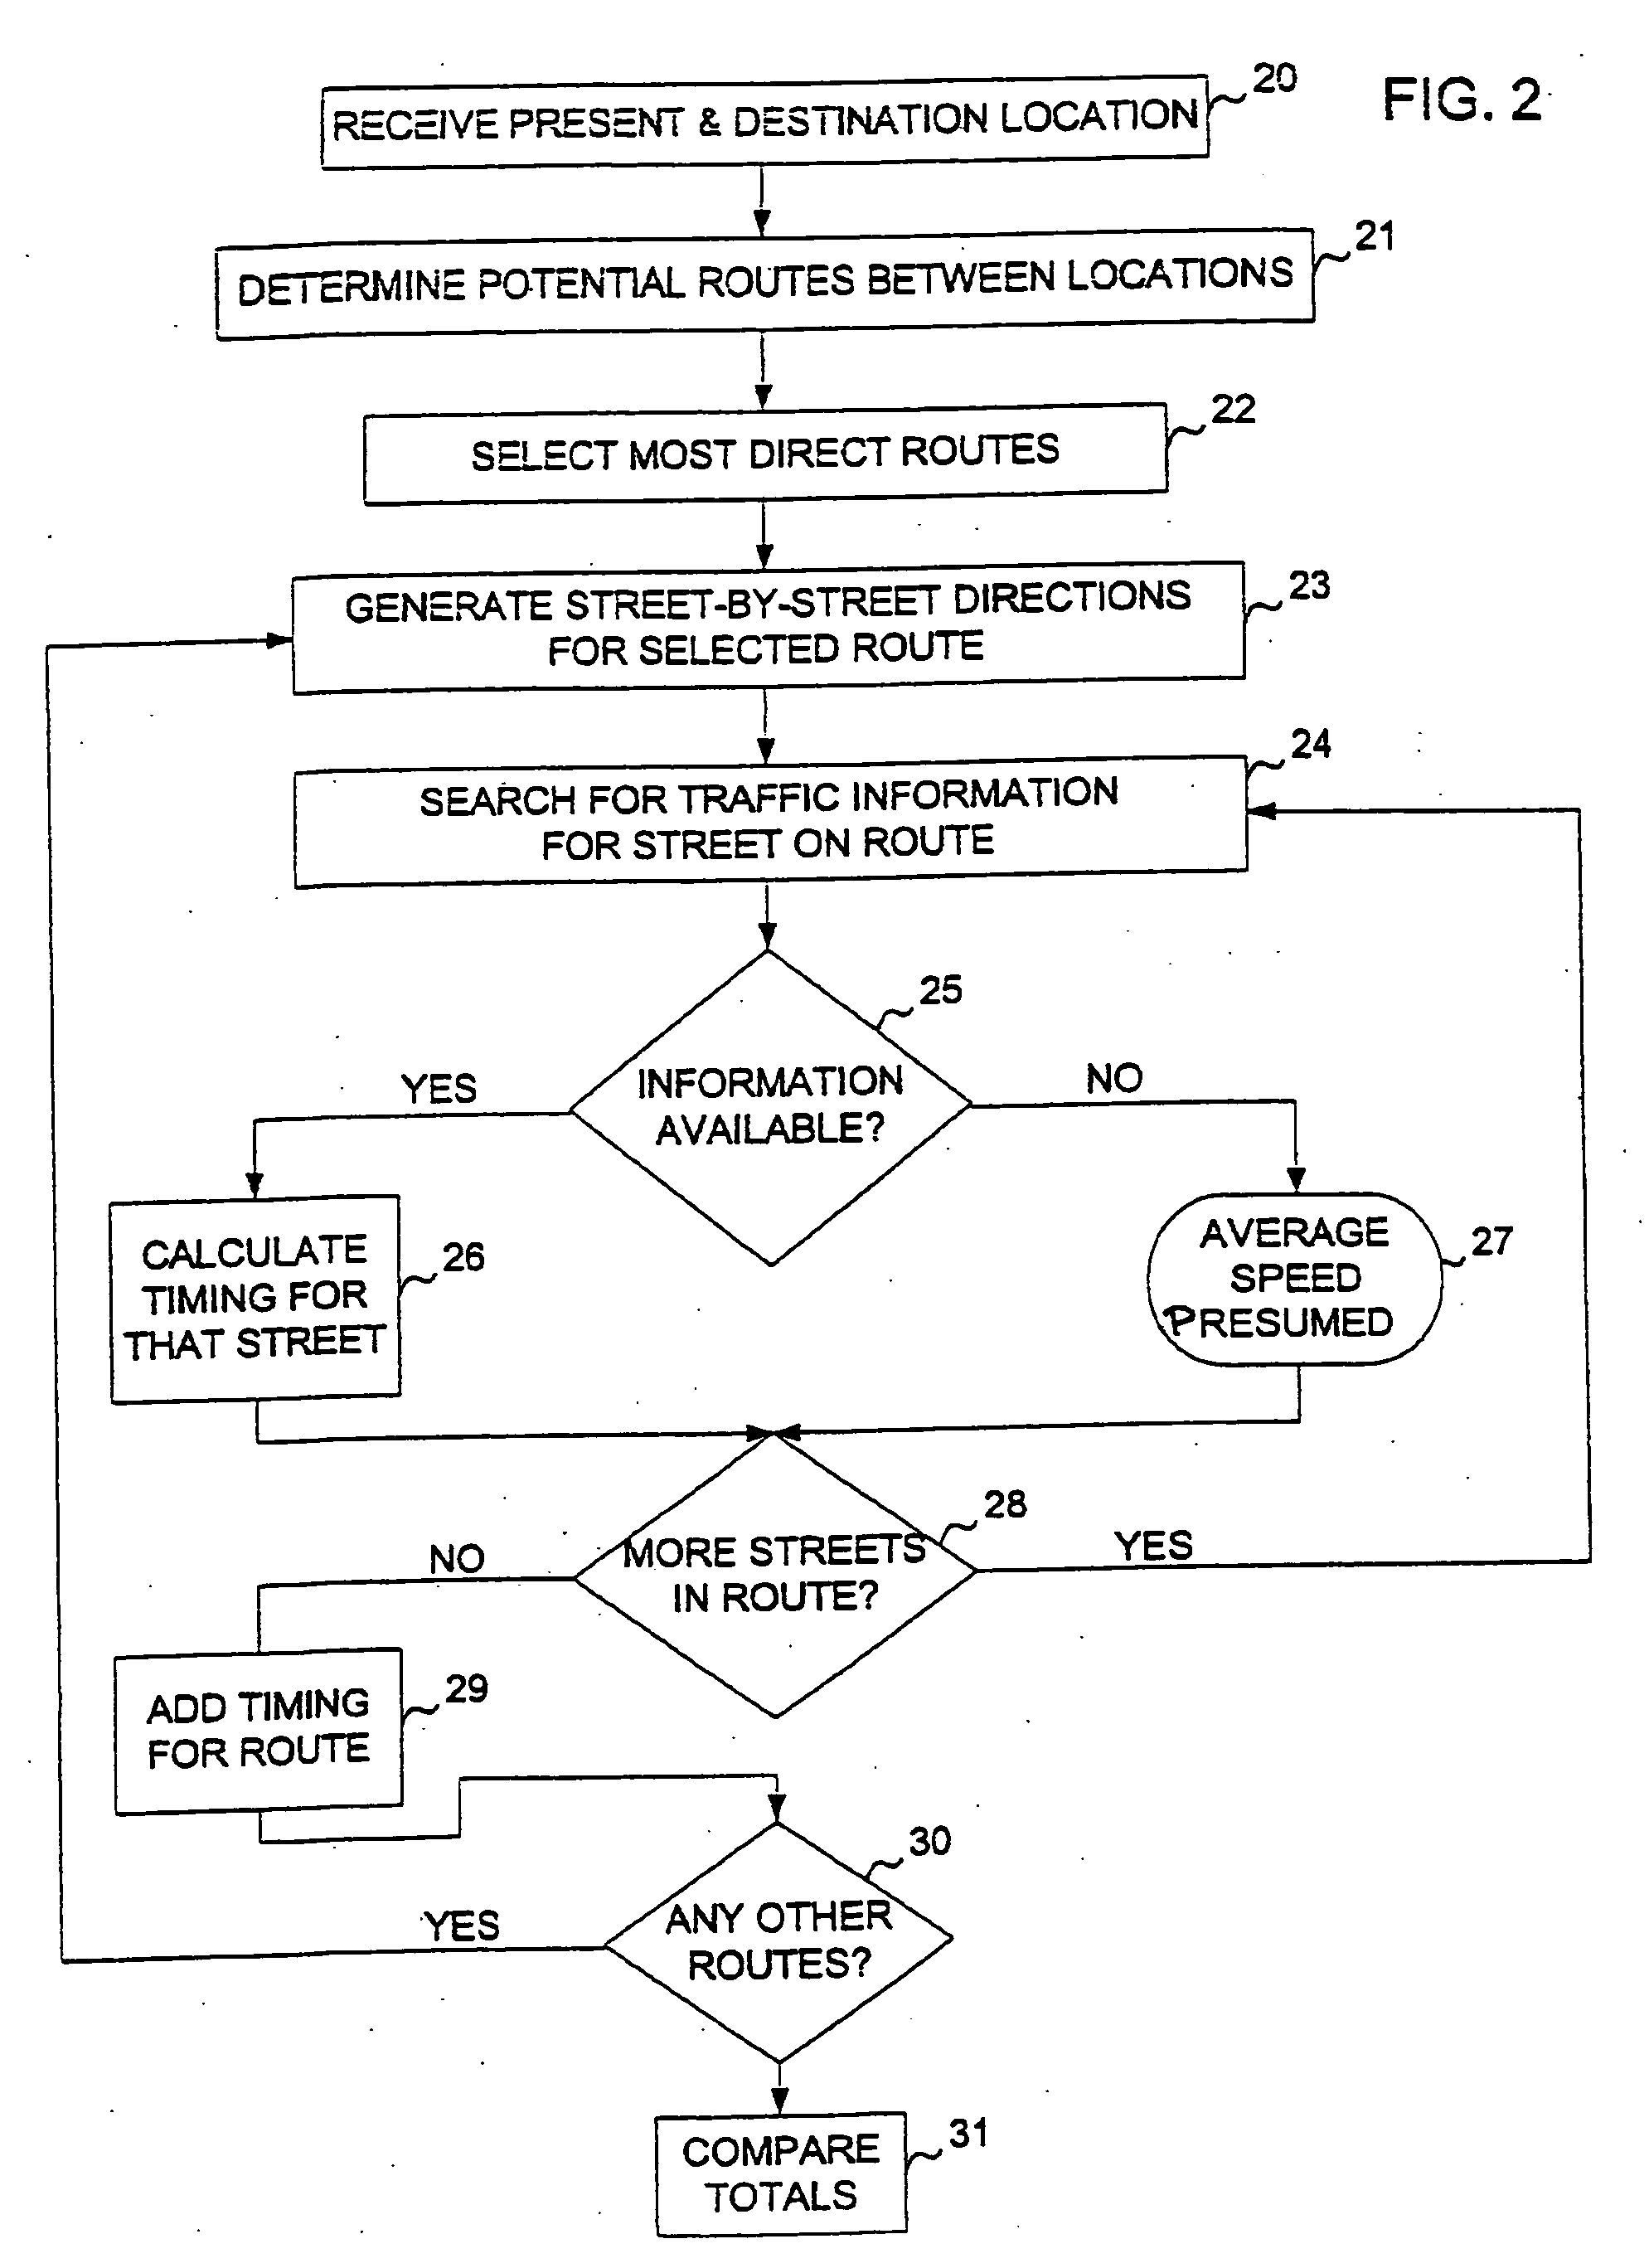 Automated location-intelligent traffic notification service systems and methods